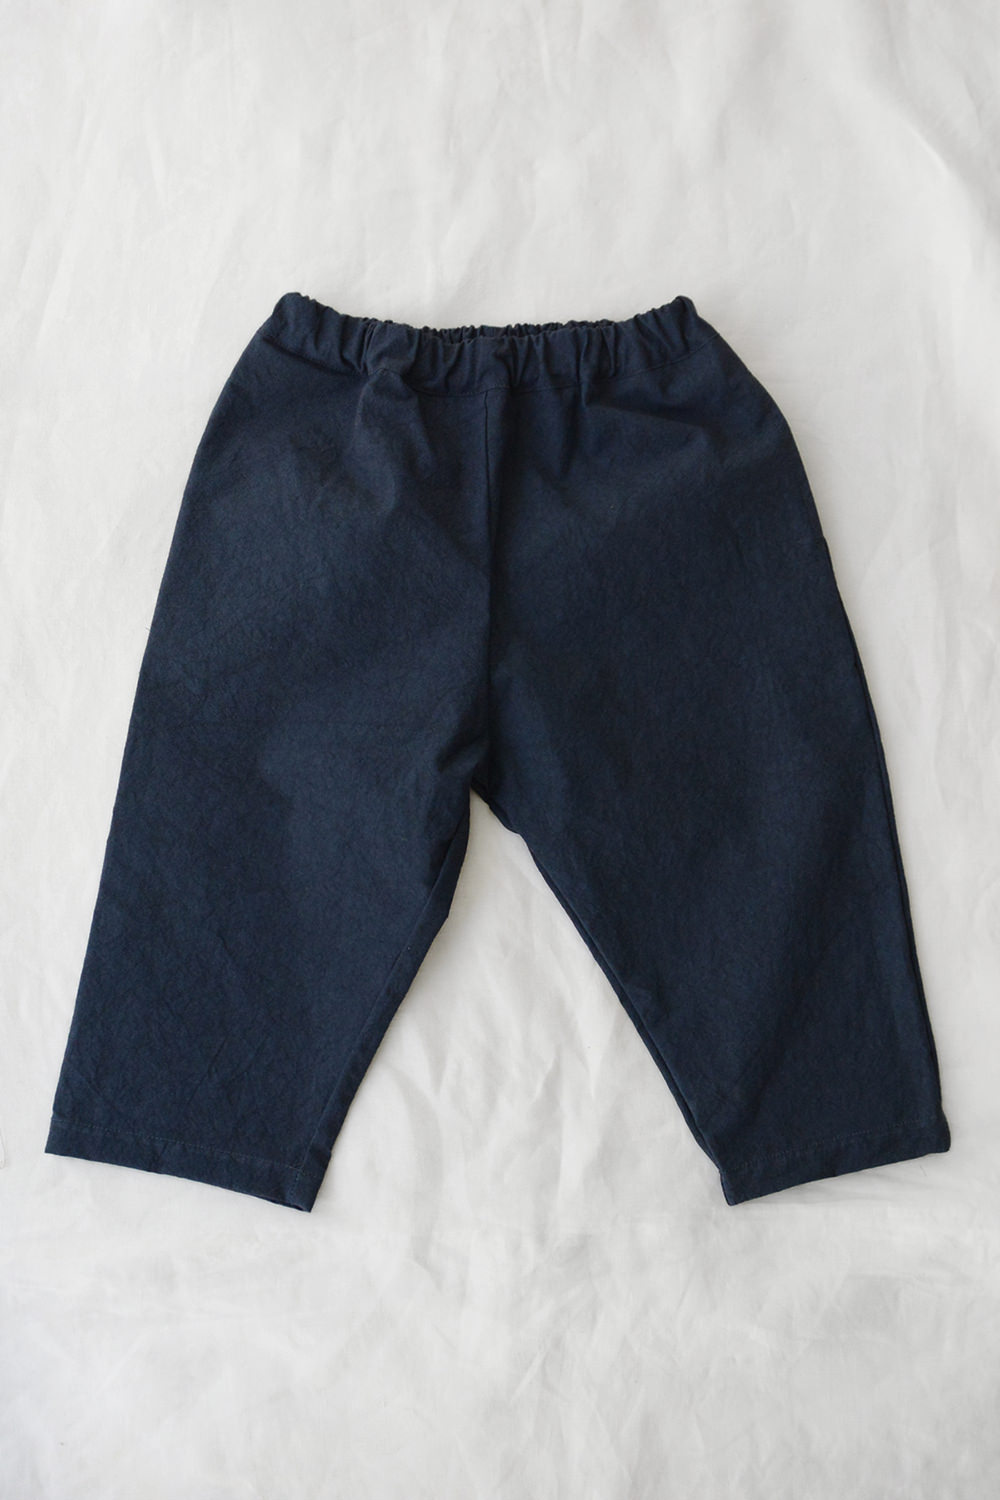 MAKIE Cotton Pants in Indigo Top Picture.